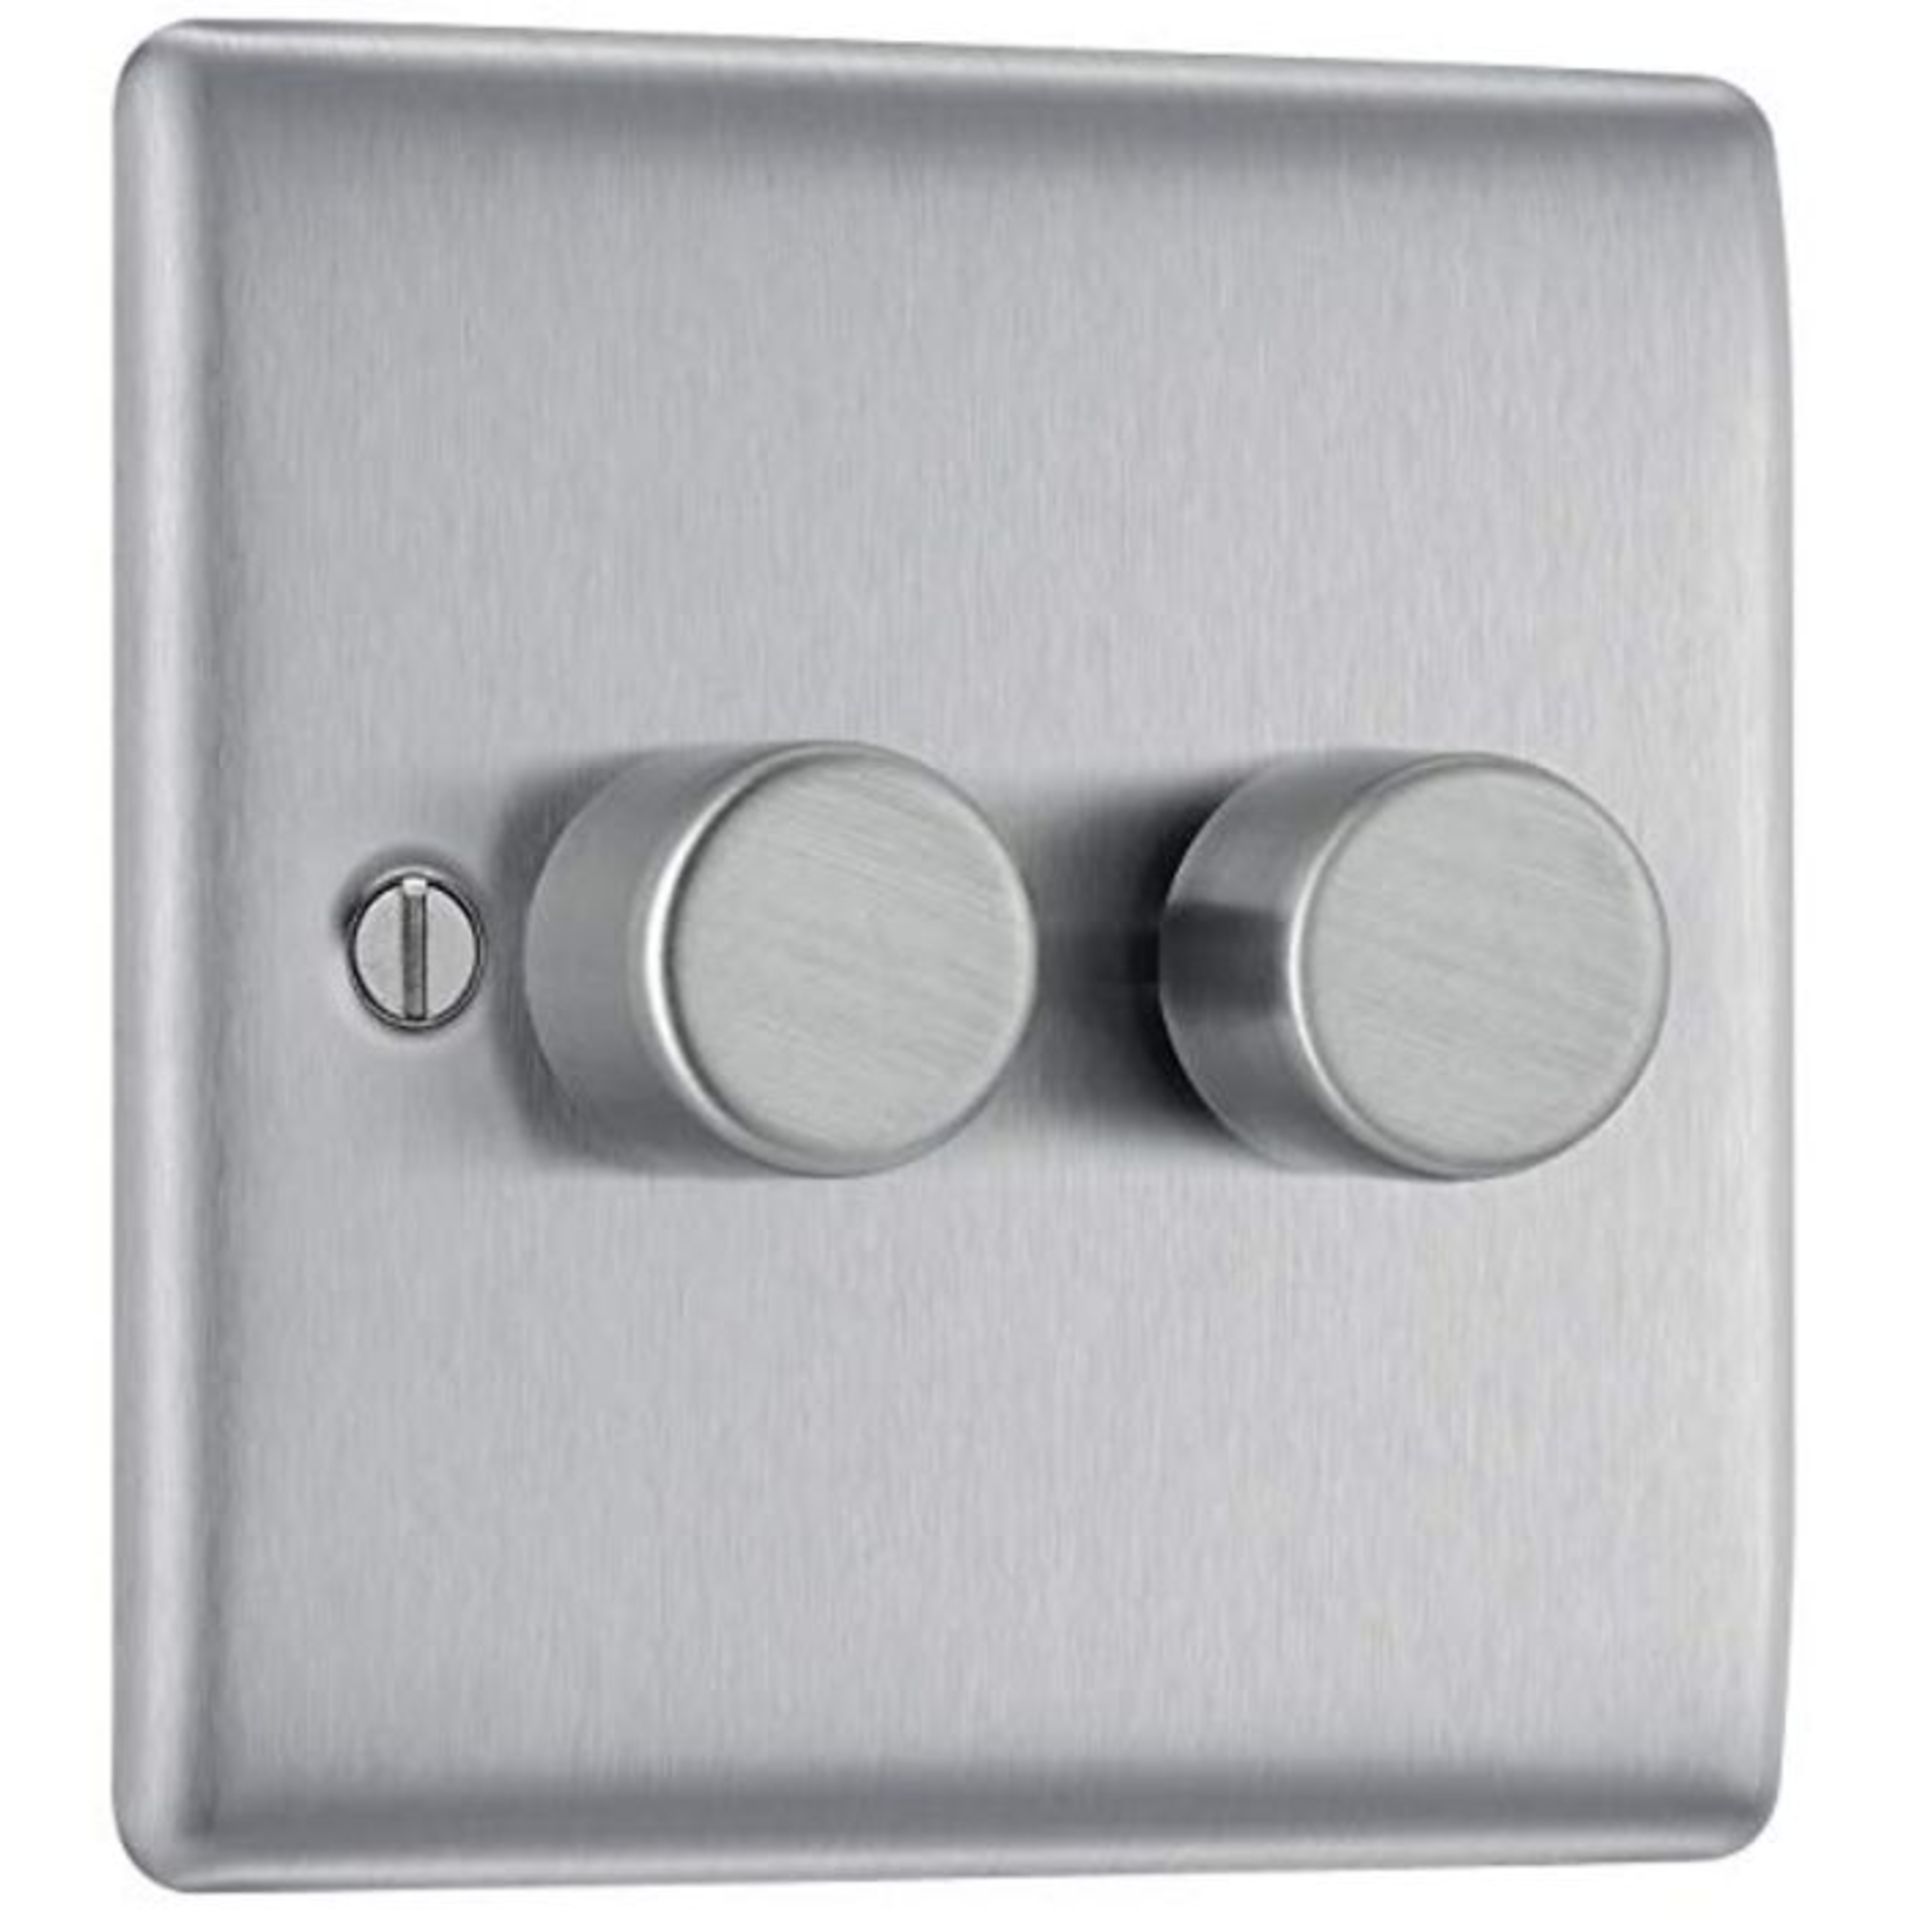 BG Electrical NBS82P-01 Double Dimmer Light Switch, Brushed Steel, 2-Way, 400 Watts